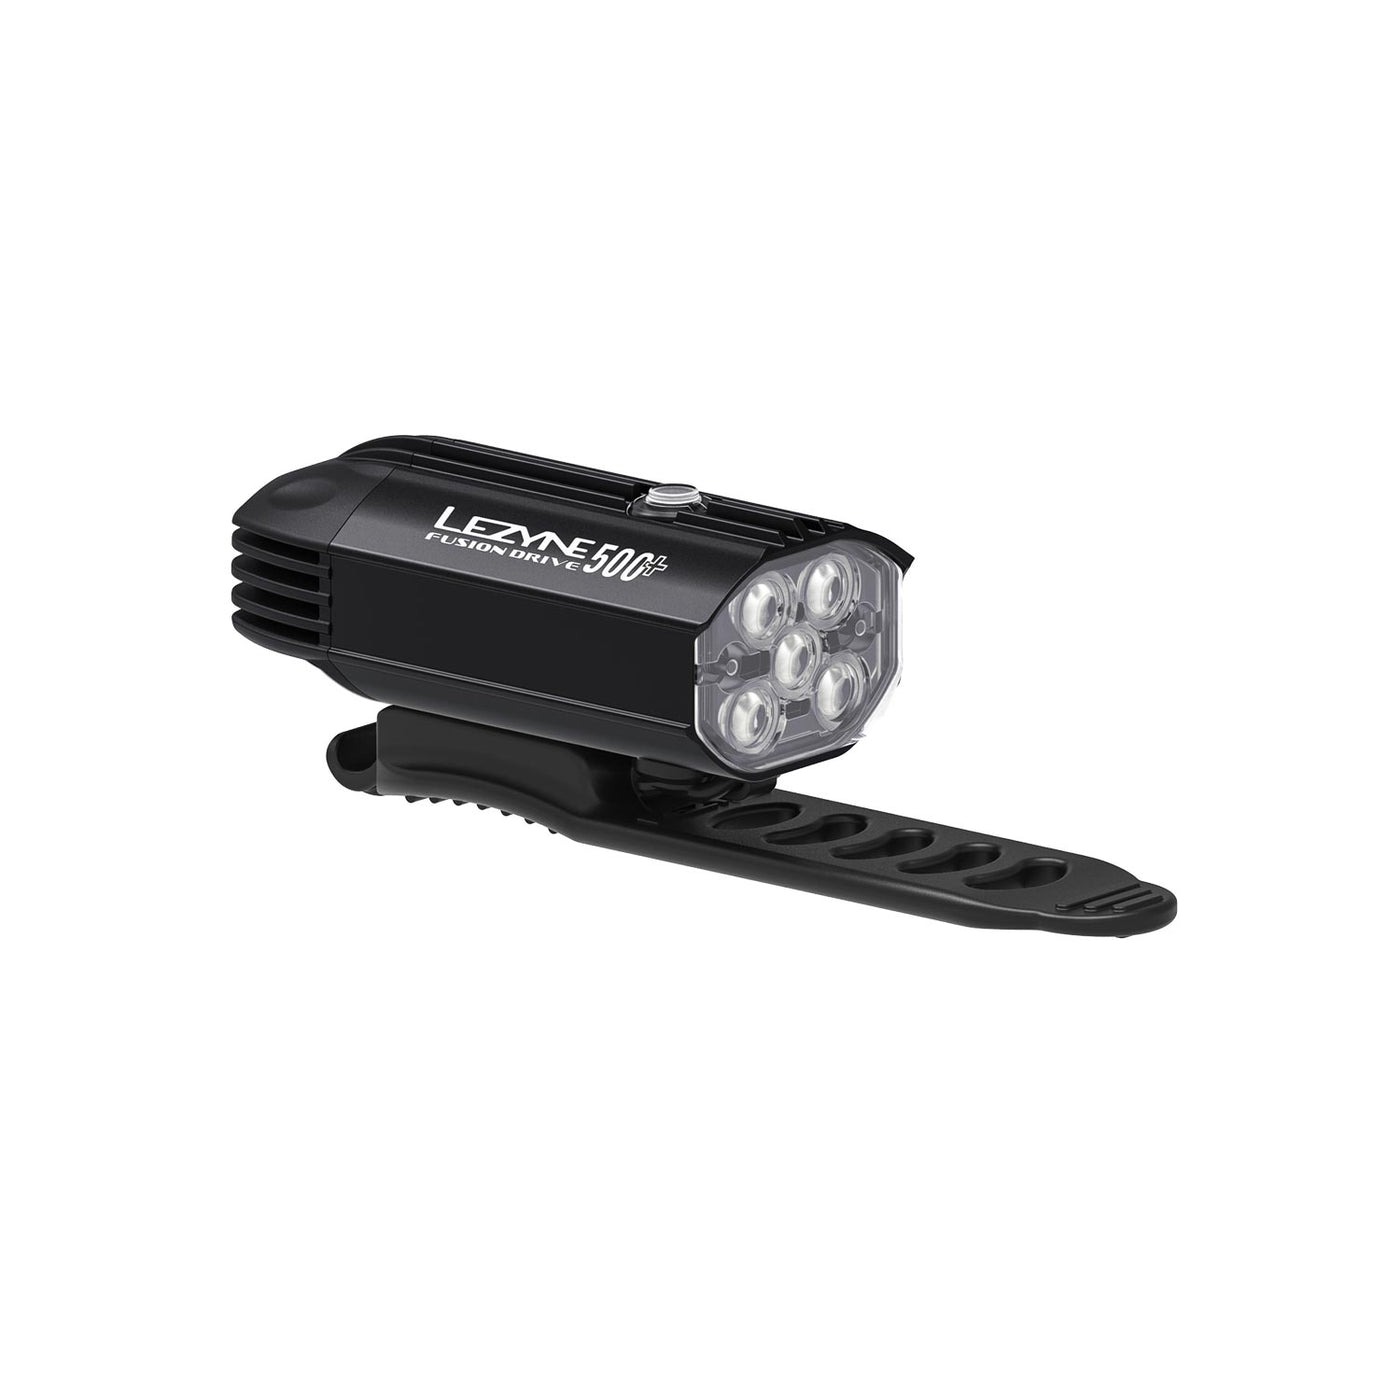 Lezyne Fusion Drive 500+ Front Light - Black - Cyclop.in